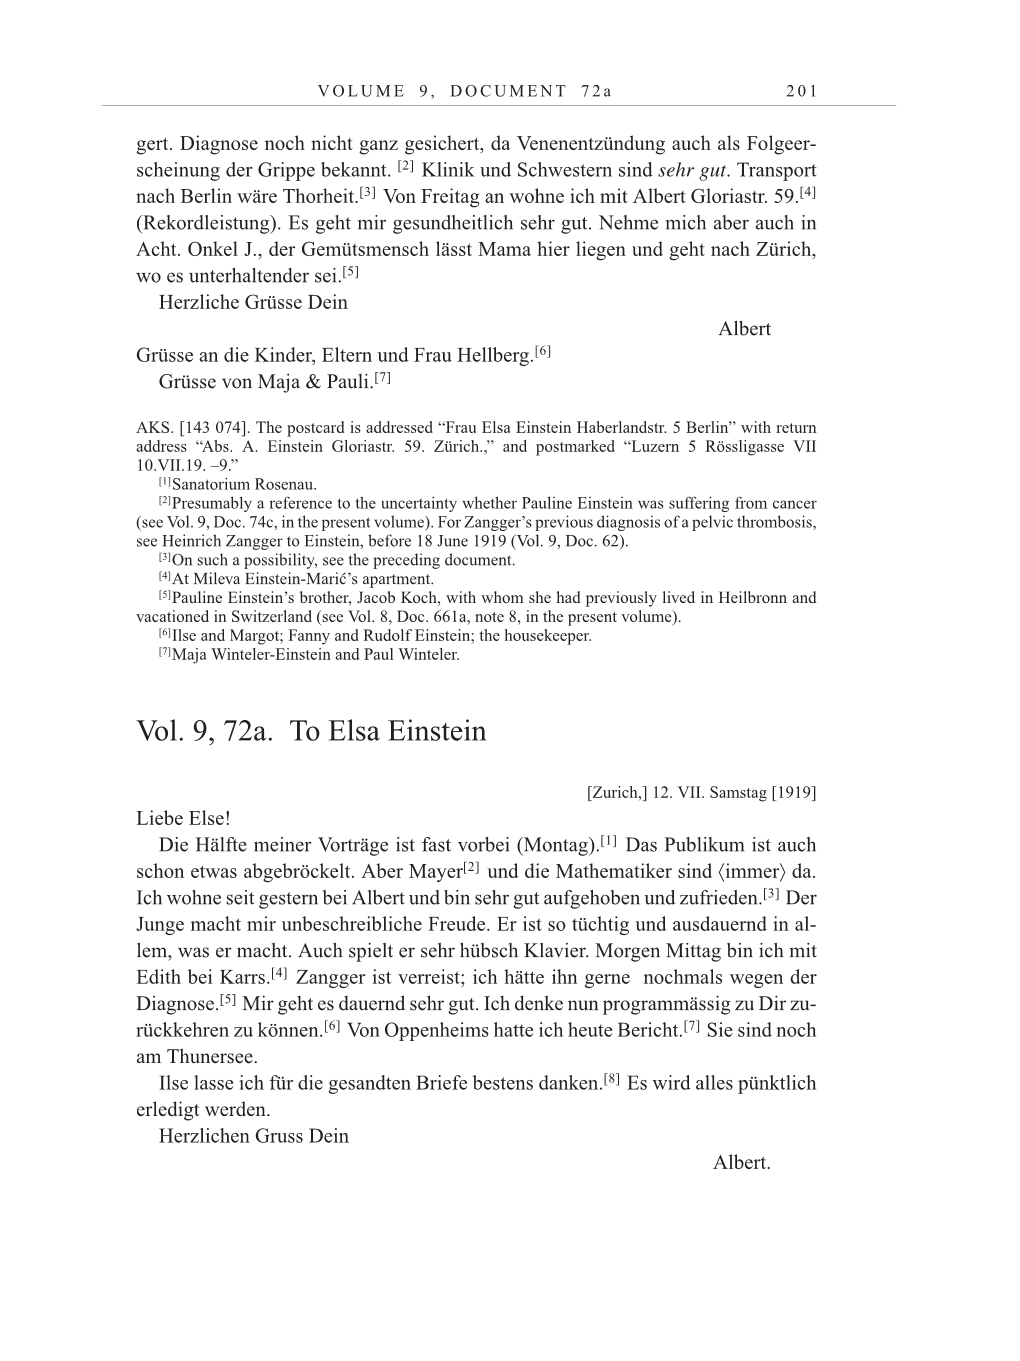 Volume 10: The Berlin Years: Correspondence May-December 1920 / Supplementary Correspondence 1909-1920 page 201